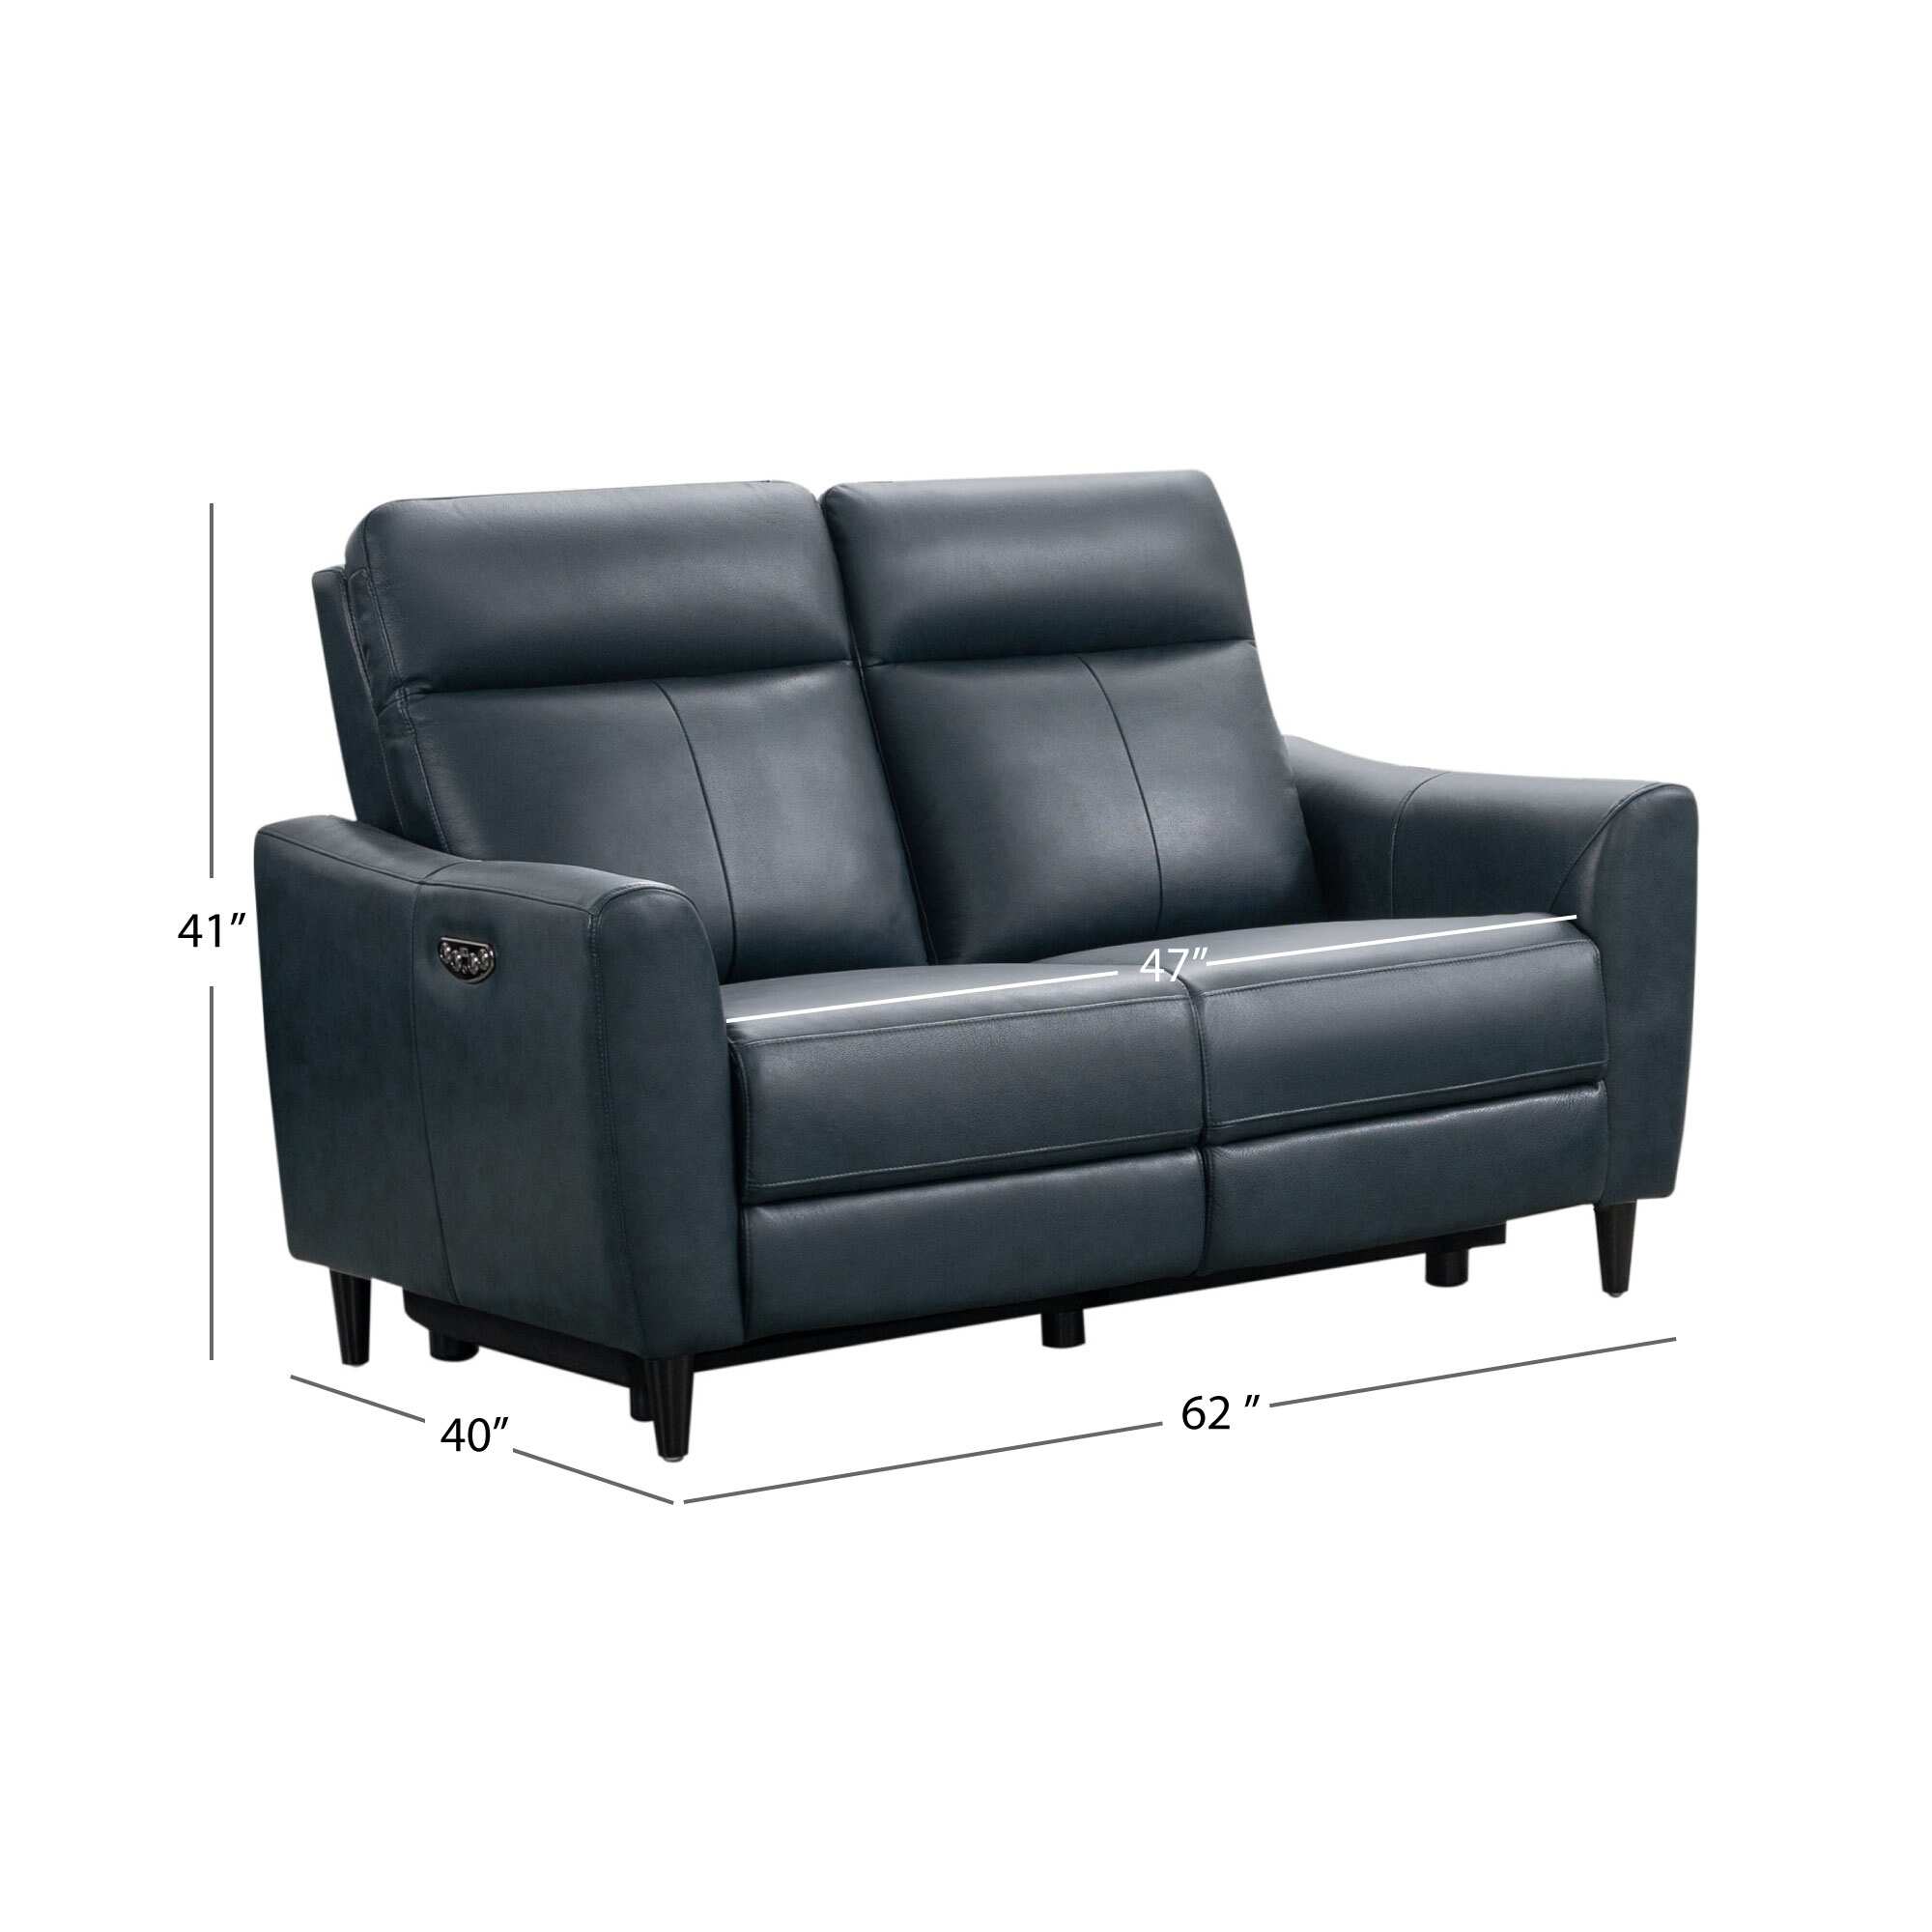 Abbyson Ludovic Leather Power Reclining Loveseat with Power Headrest